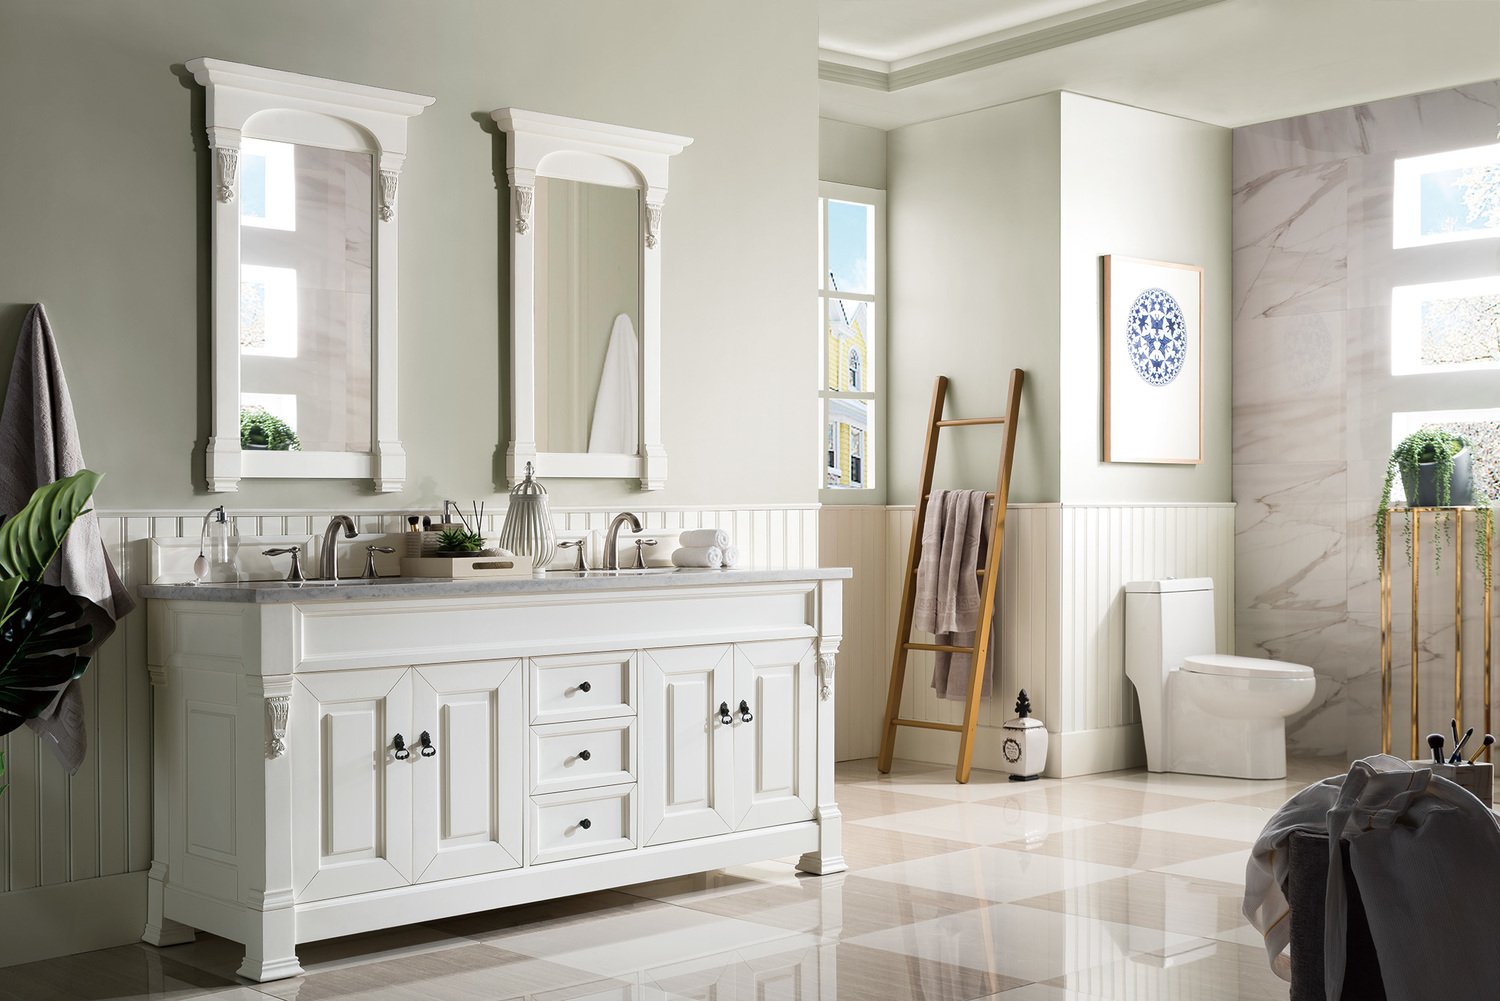 bathroom cabinet replacement James Martin Vanity Bright White Transitional